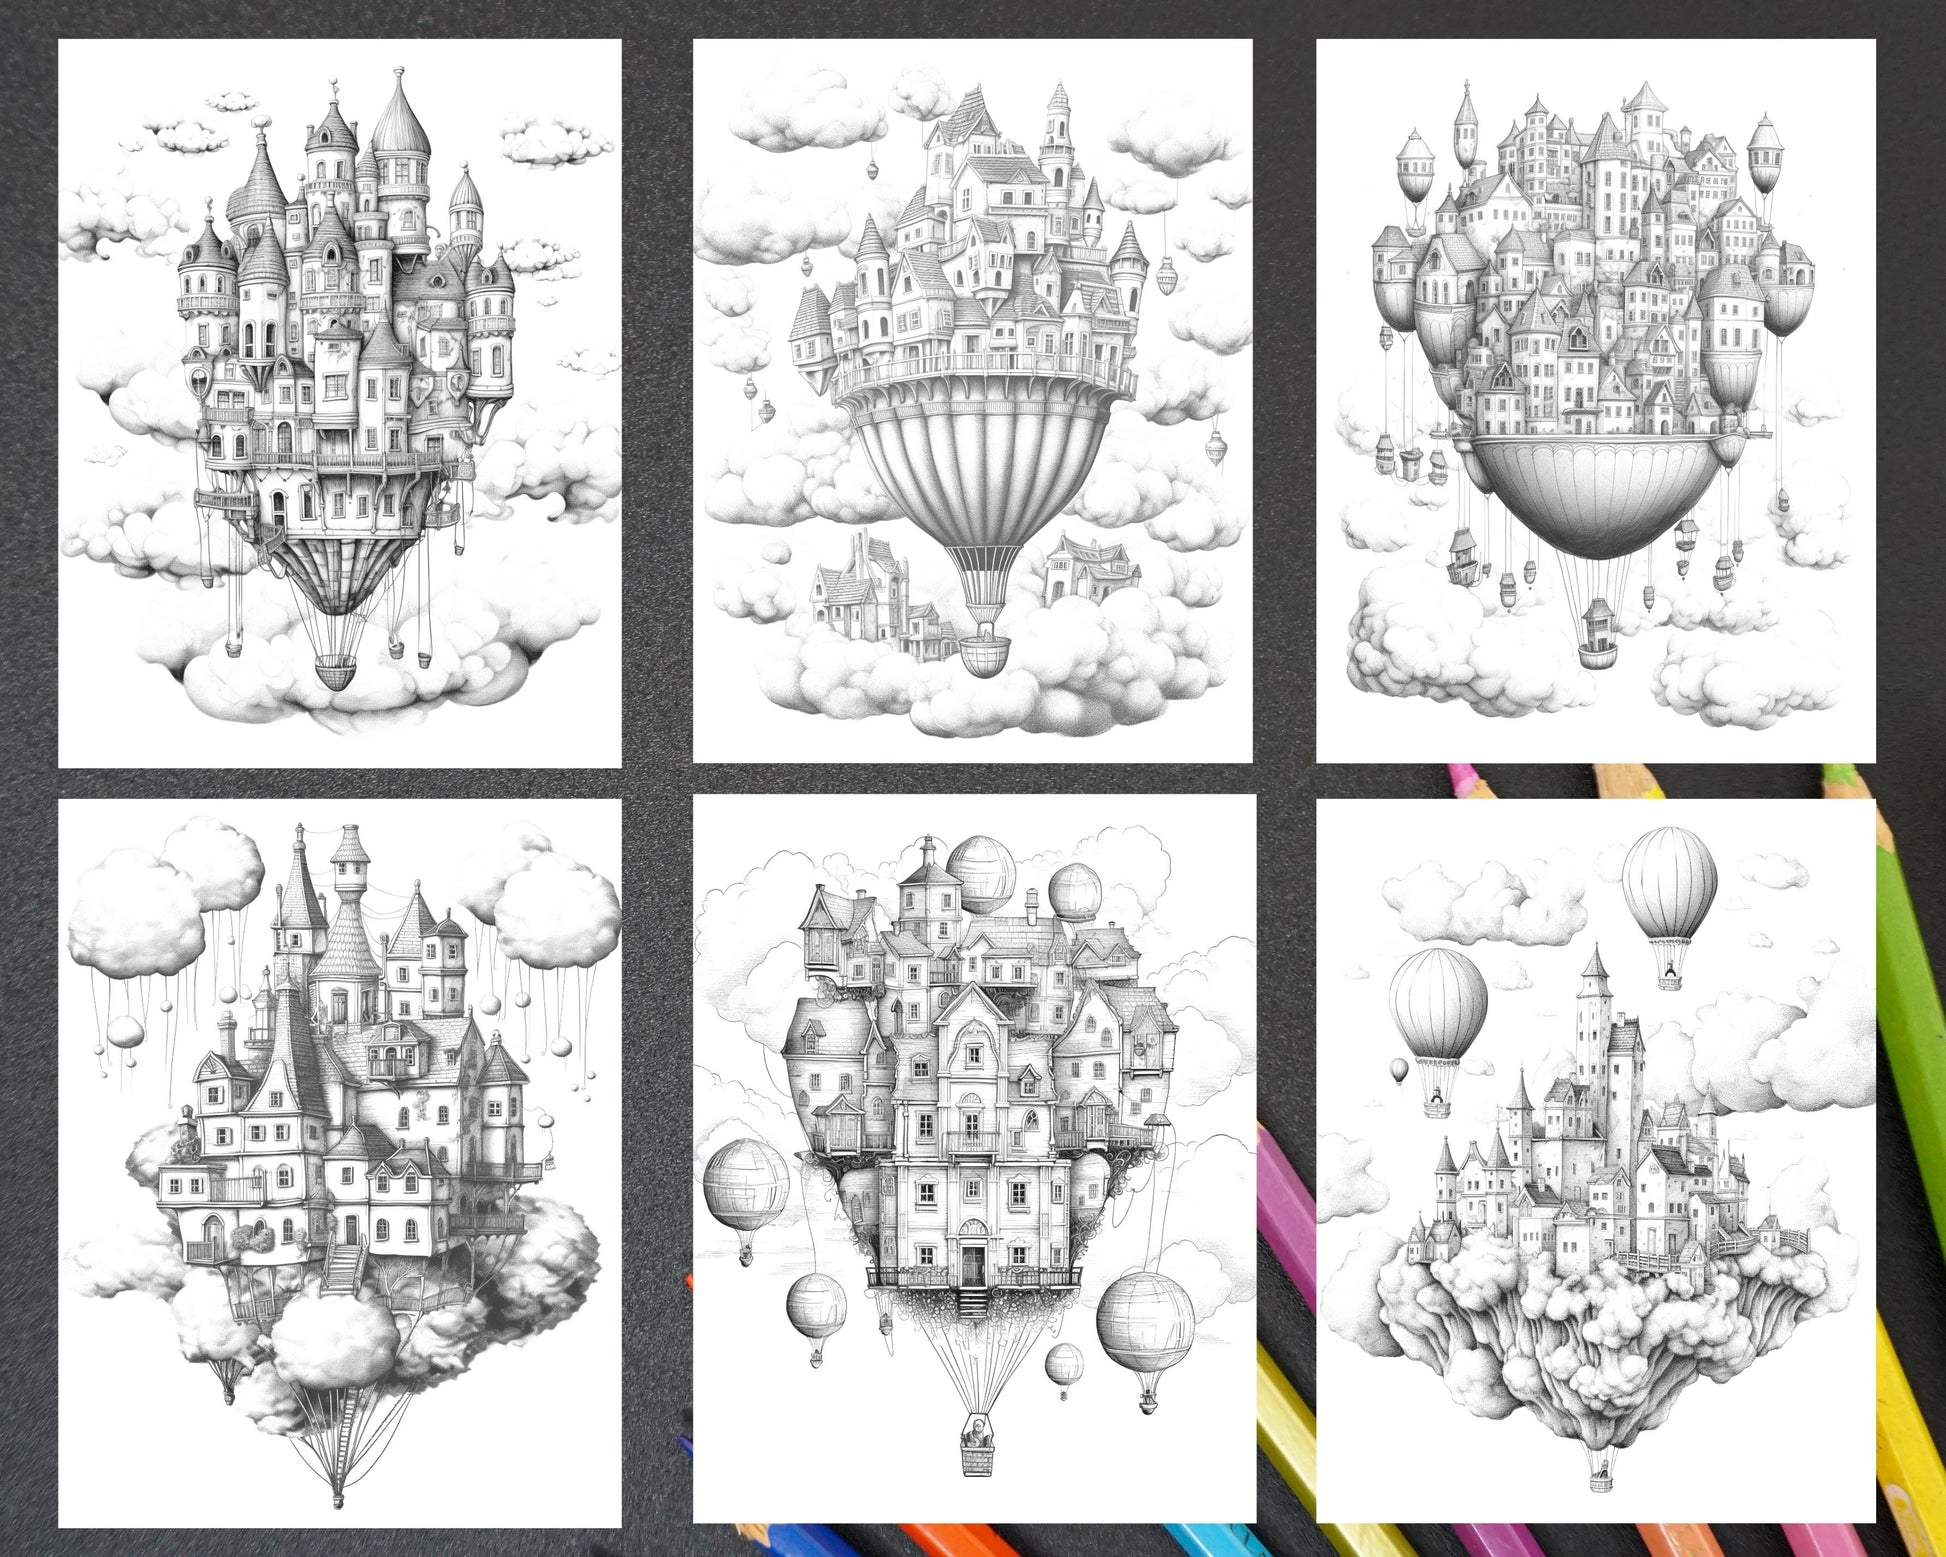 fantasy sky house grayscale coloring page, adult printable coloring page, black and white coloring design, grayscale coloring for adults, detailed fantasy coloring sheet, intricate printable coloring art, stress-relieving grayscale image, mindful coloring page for adults, art therapy grayscale picture, printable sky houses coloring